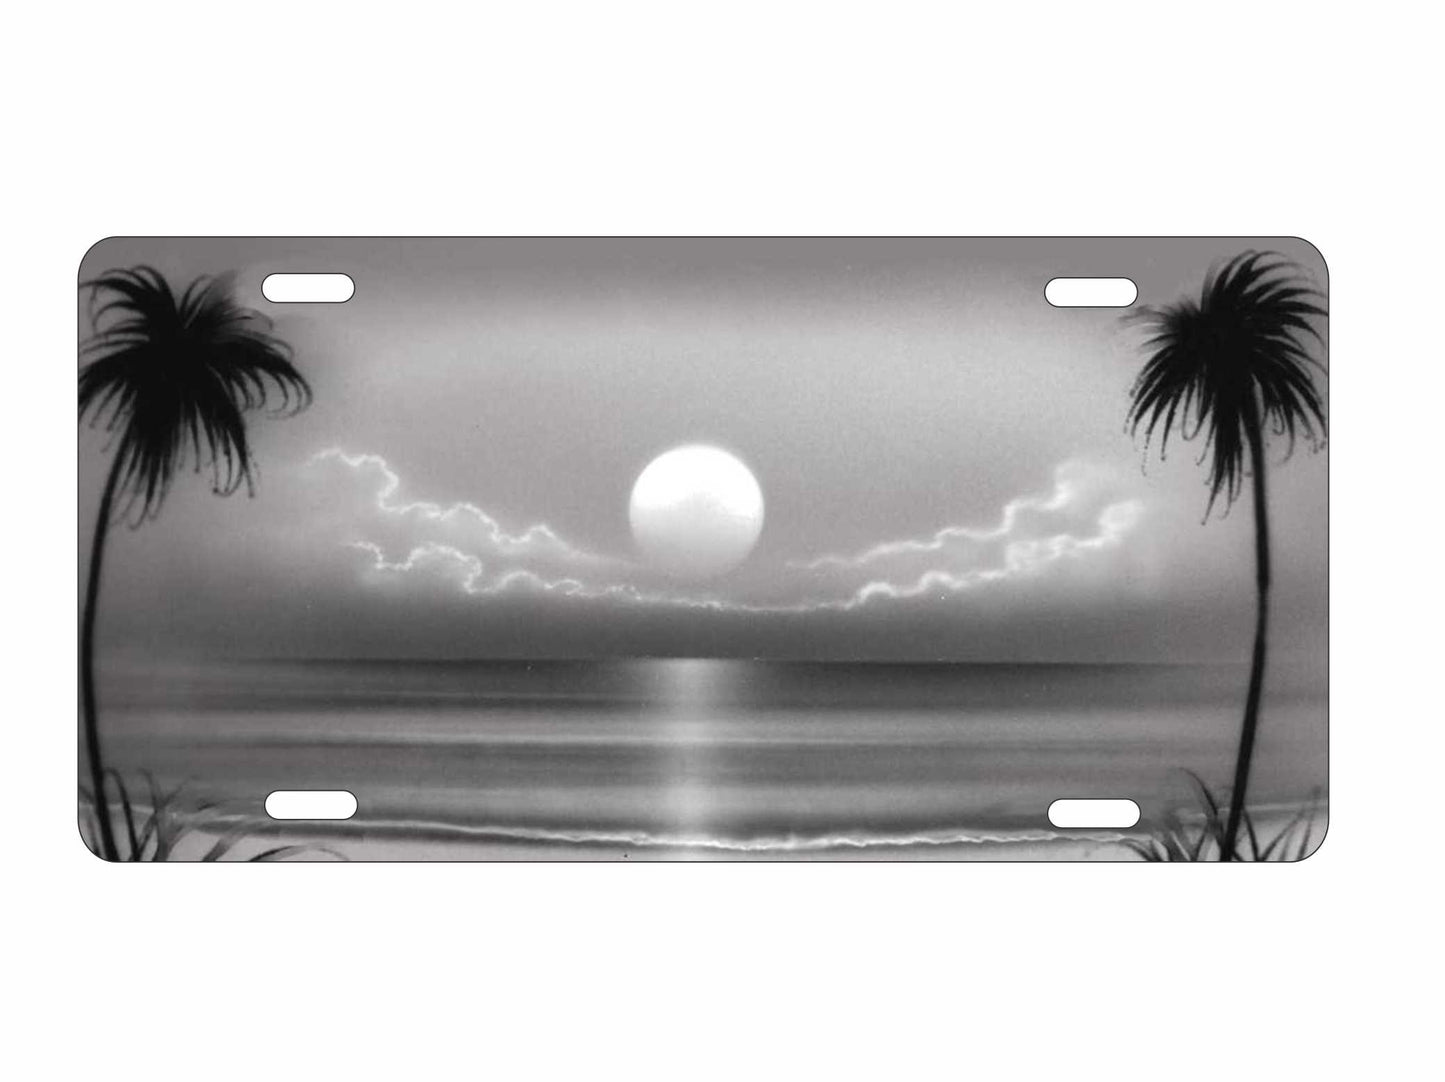 Airbrushed grey beach scene car tag personalized novelty decorative front license plate